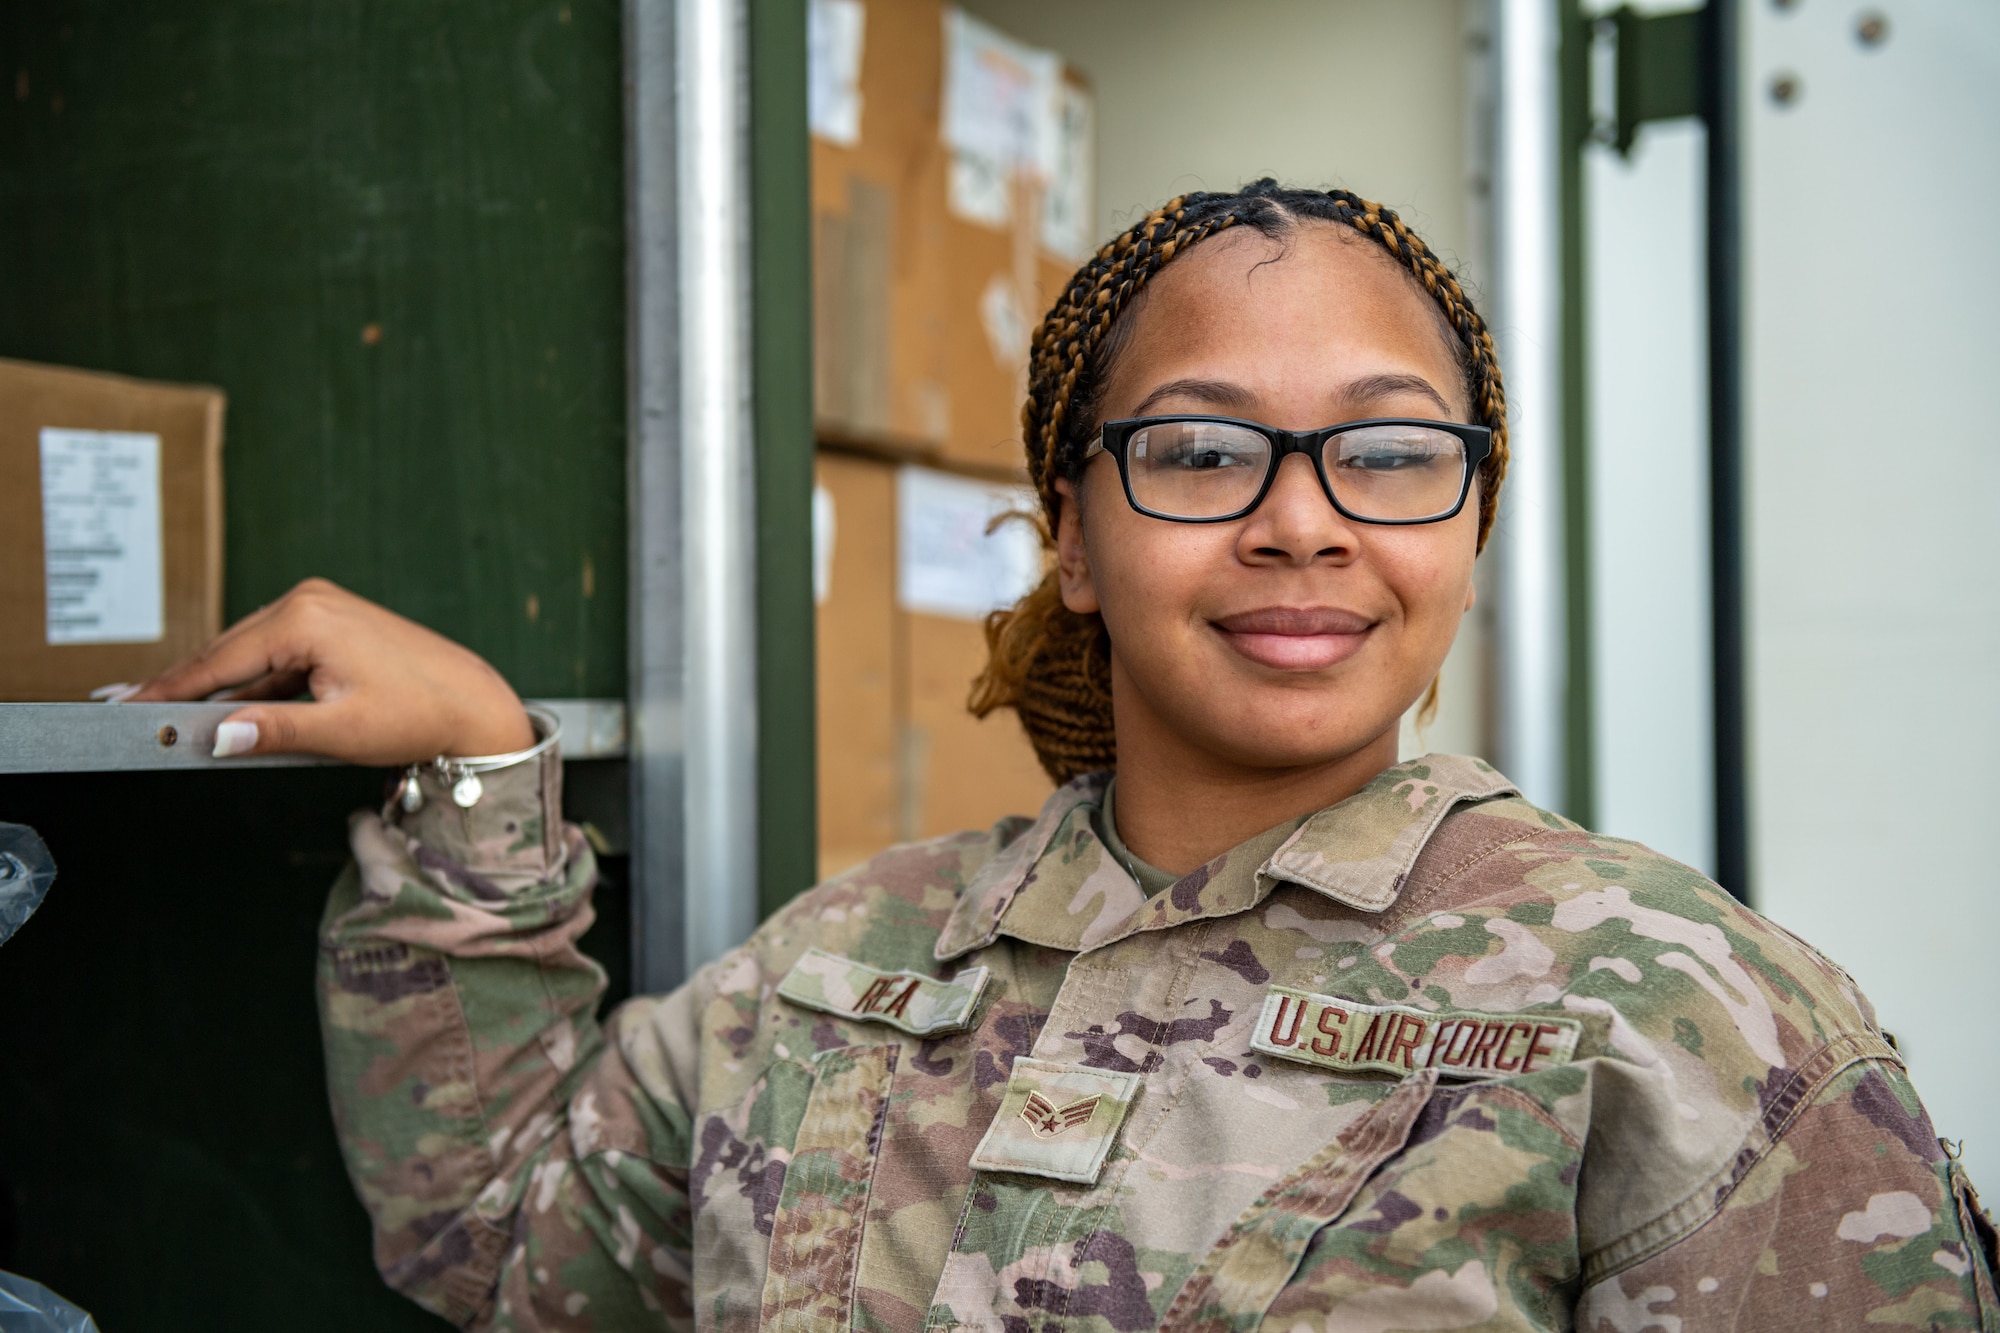 U.S. Air Force Senior Airman Syana Rea, 23rd Logistics Readiness Squadron decentralized material support journeyman, poses for a photo during Exercise Ready Tiger 24-1 at Savannah Air National Guard Base, Georgia, April 9, 2024. Ready Tiger 24-1 is a readiness exercise demonstrating the 23rd Wing’s ability to plan, prepare and execute operations and maintenance to project air power in contested and dispersed locations, defending the United States’ interests and allies. (U.S. Air Force photo by Senior Airman Courtney Sebastianelli)